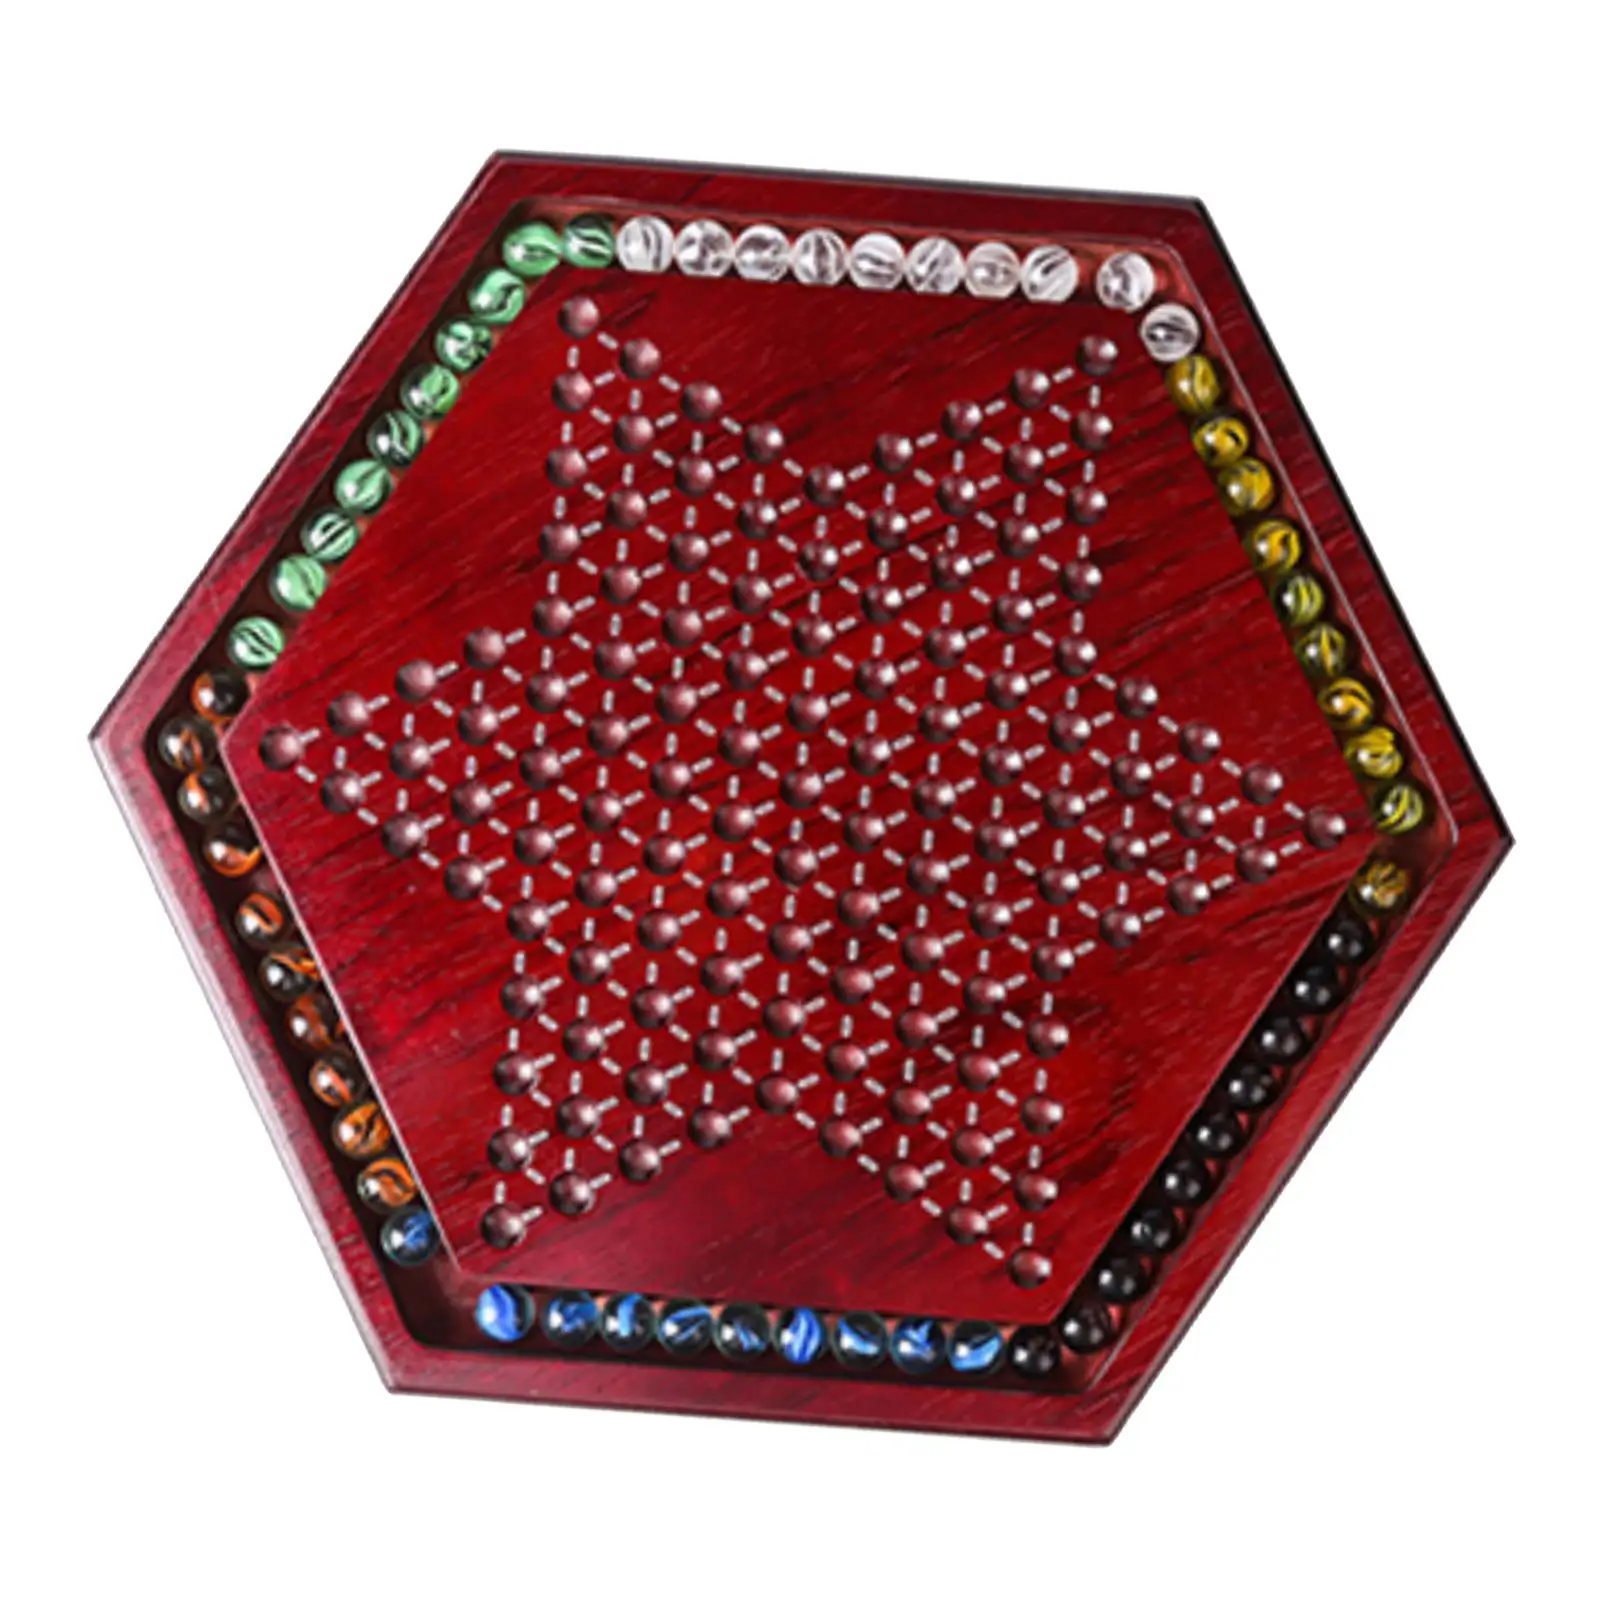 Chinese Checkers with Marbles, Fine Wooden Chessboard Children Gifts Board Game, with 60 Glass Marbles